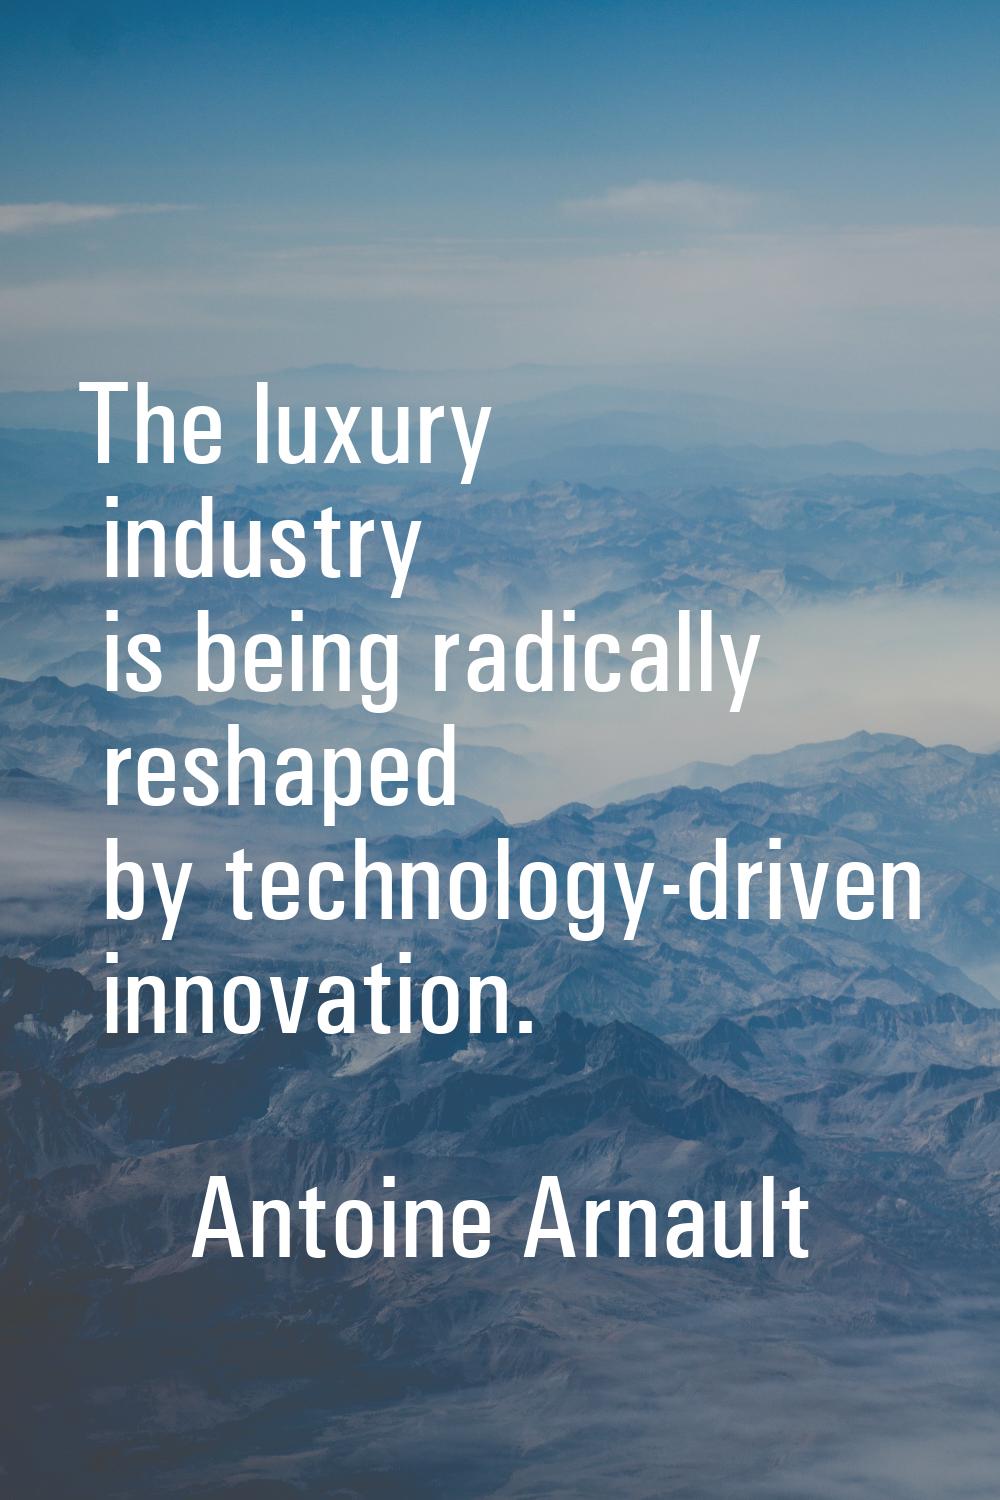 The luxury industry is being radically reshaped by technology-driven innovation.